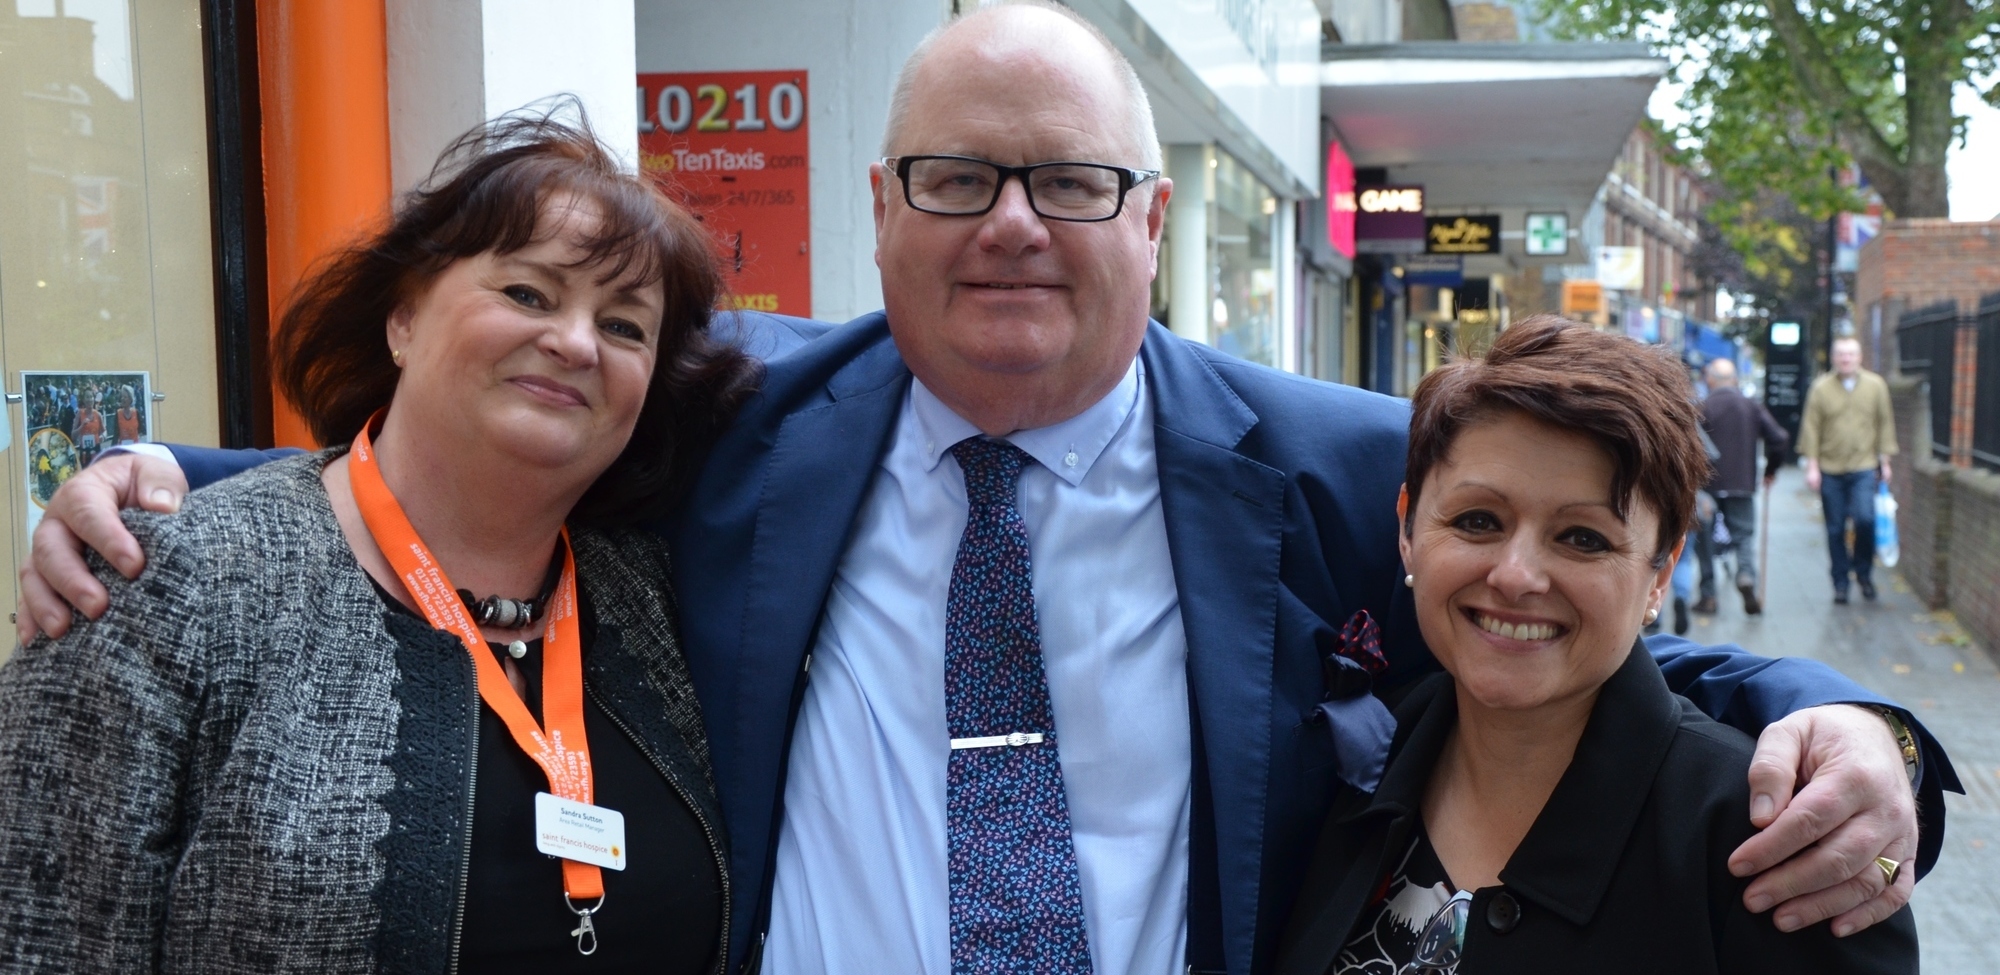 Pic D Sandra Sutton, Sir Eric Pickles MP and Michelle Nicholls (cropped)